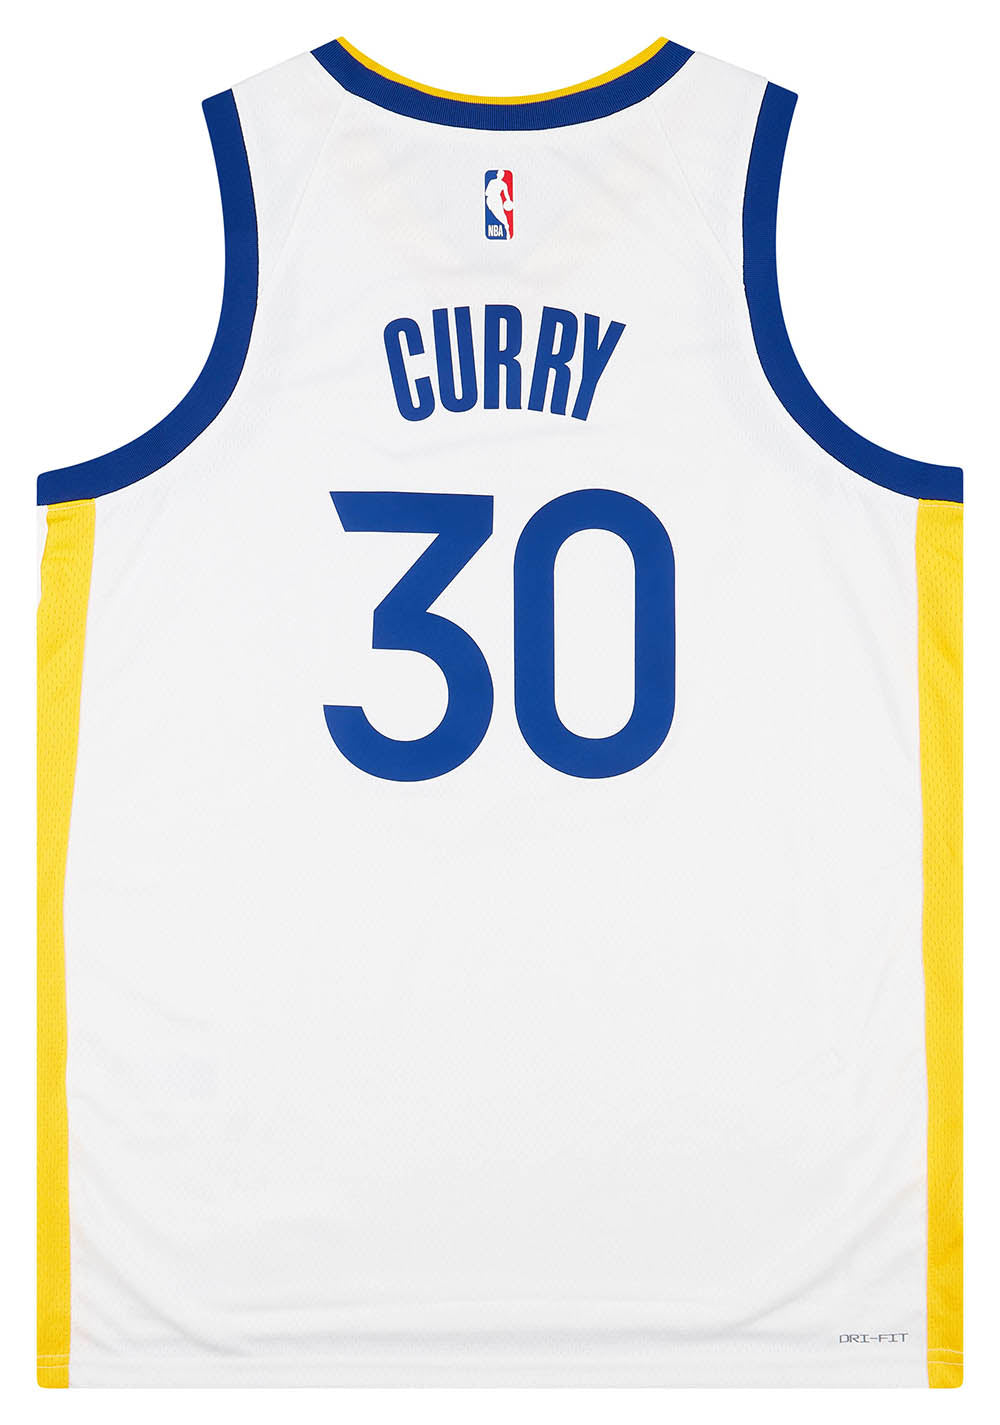 Stephen Curry Golden State Warriors Jersey Nike – Classic Authentics